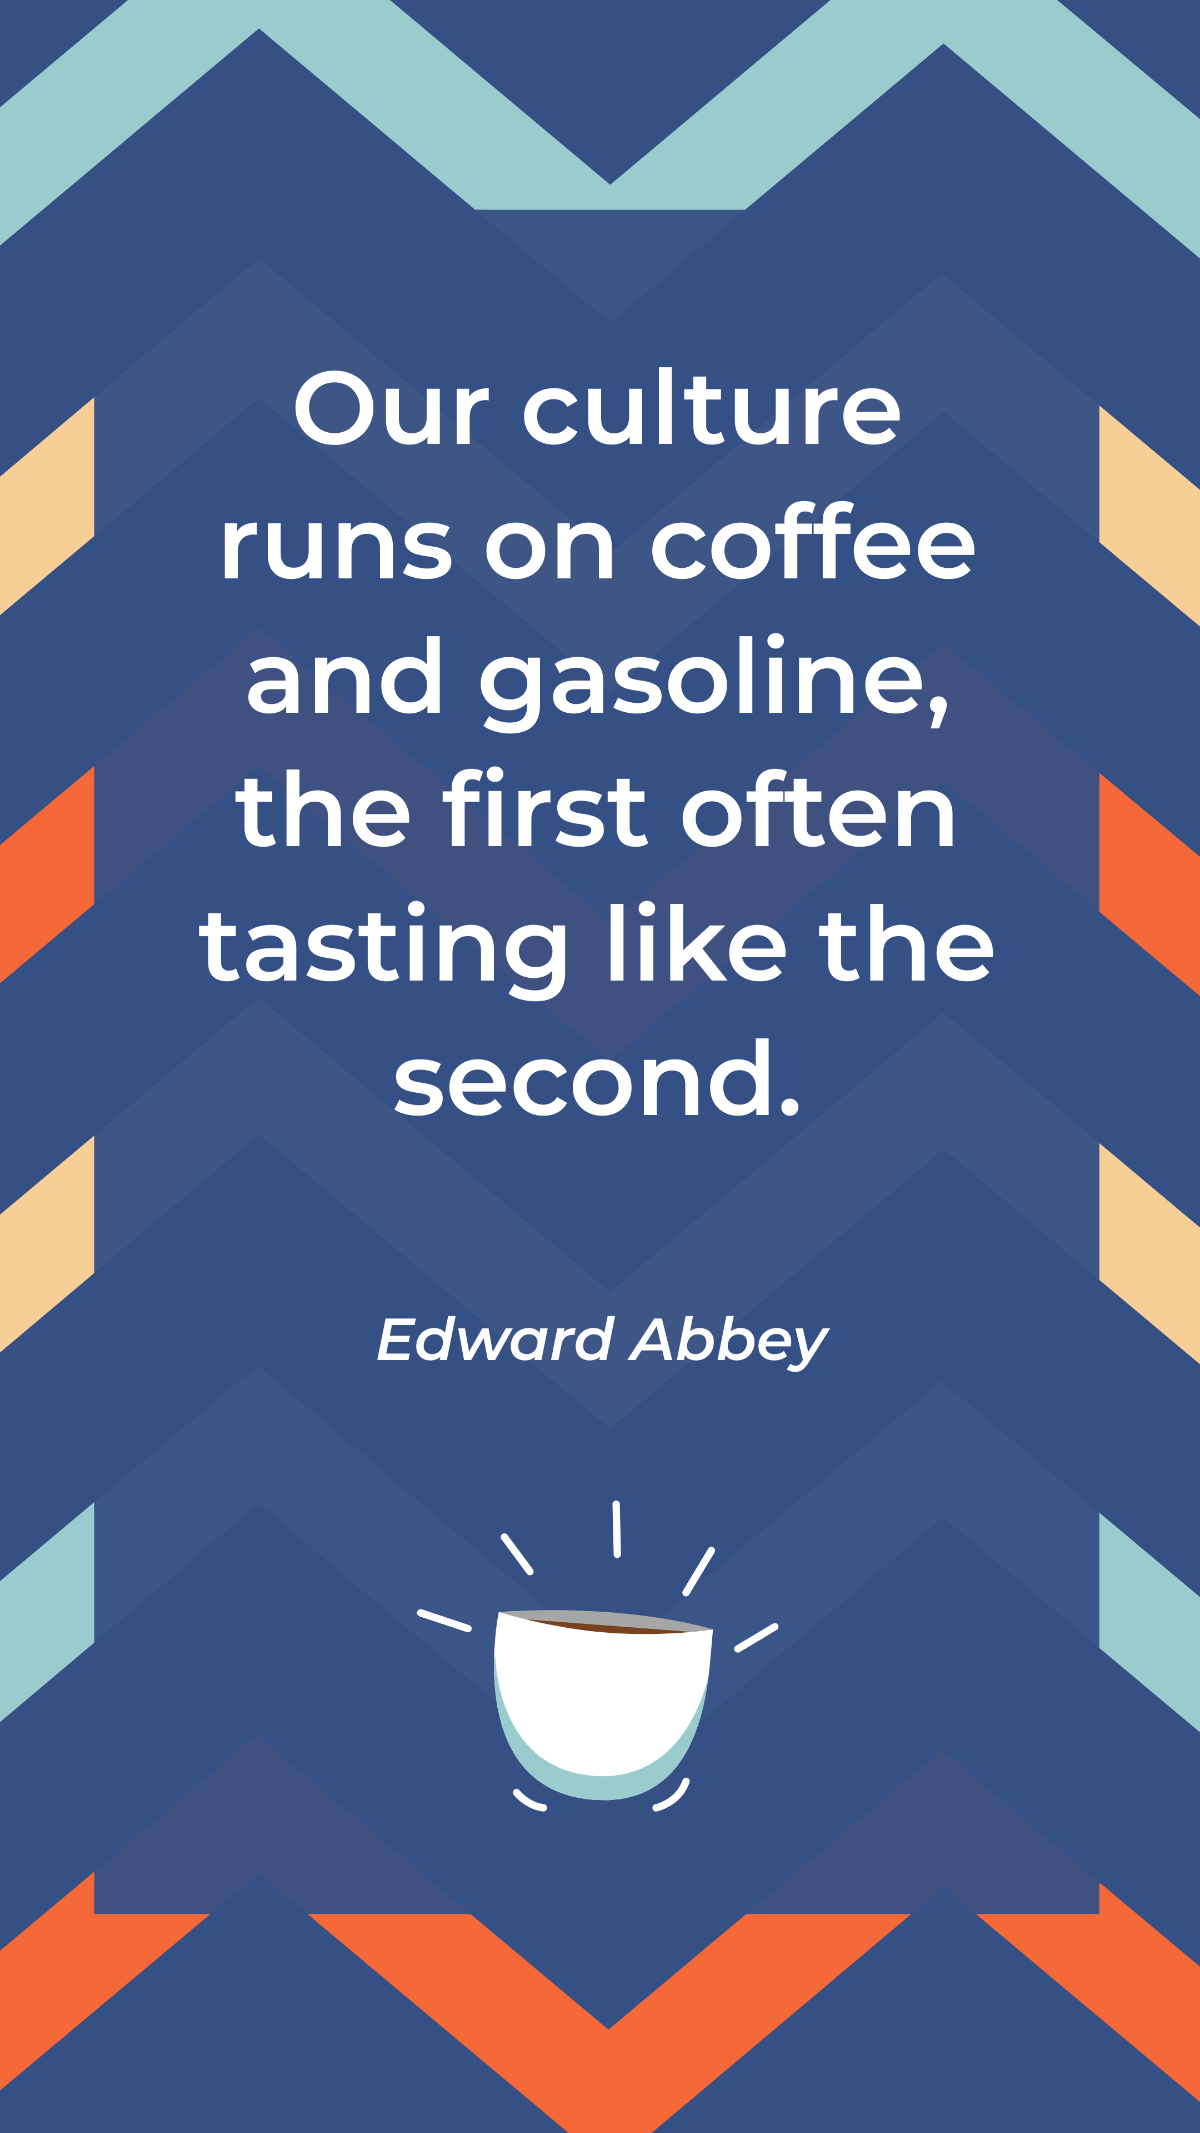 Edward Abbey - Our culture runs on coffee and gasoline, the first often tasting like the second.